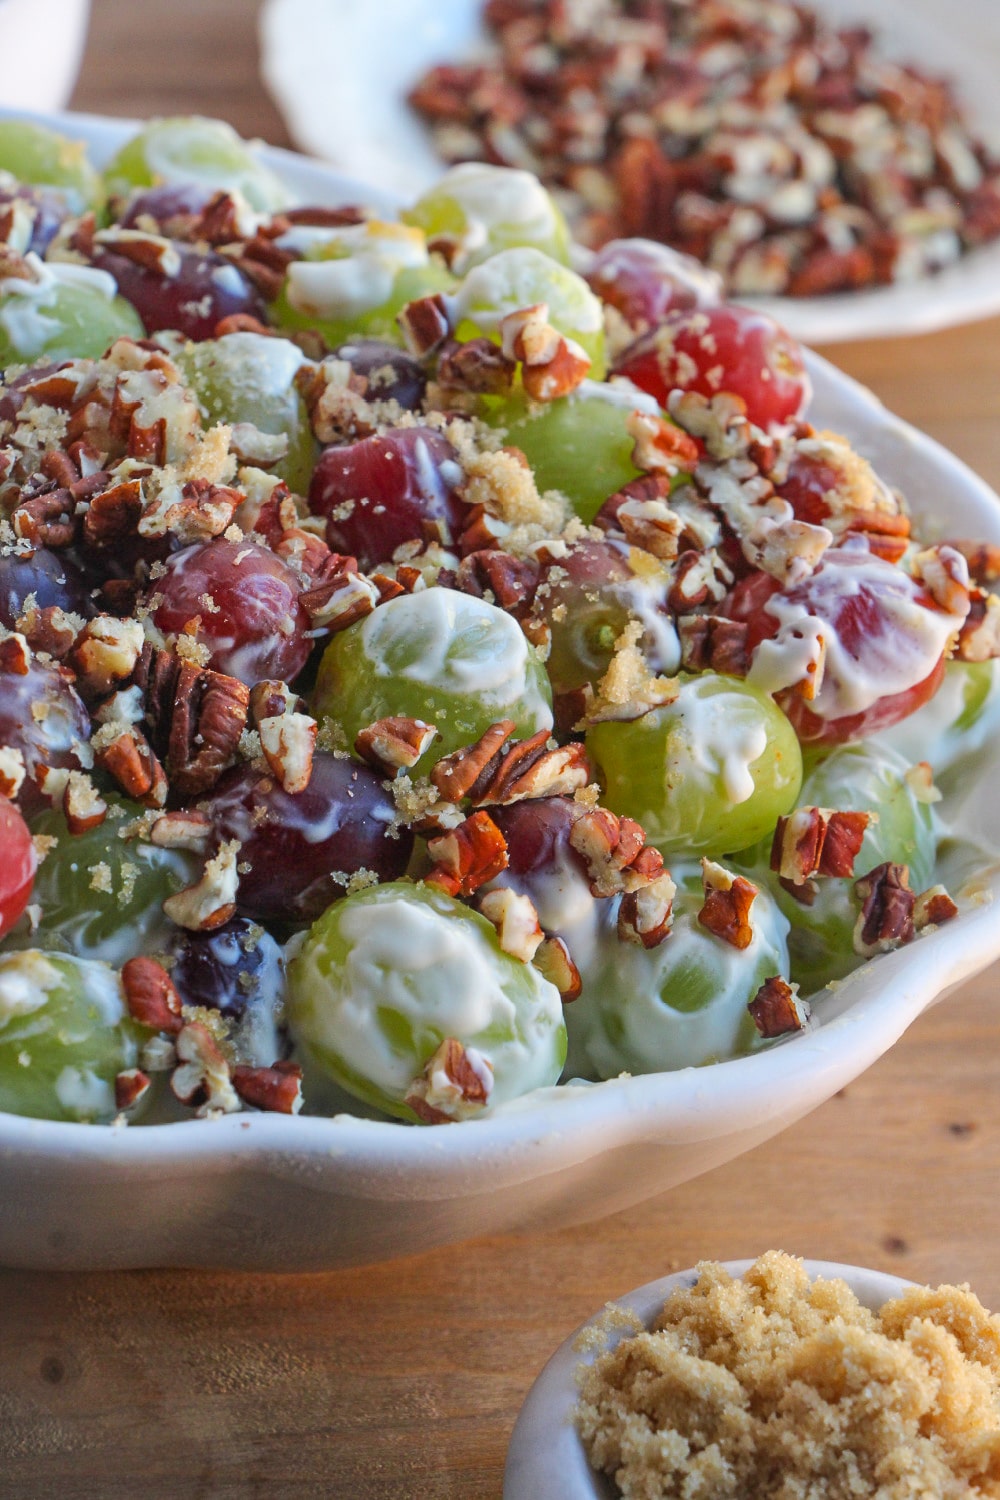 Grape salad in a white serving bowl resting on a. wood cutting board.